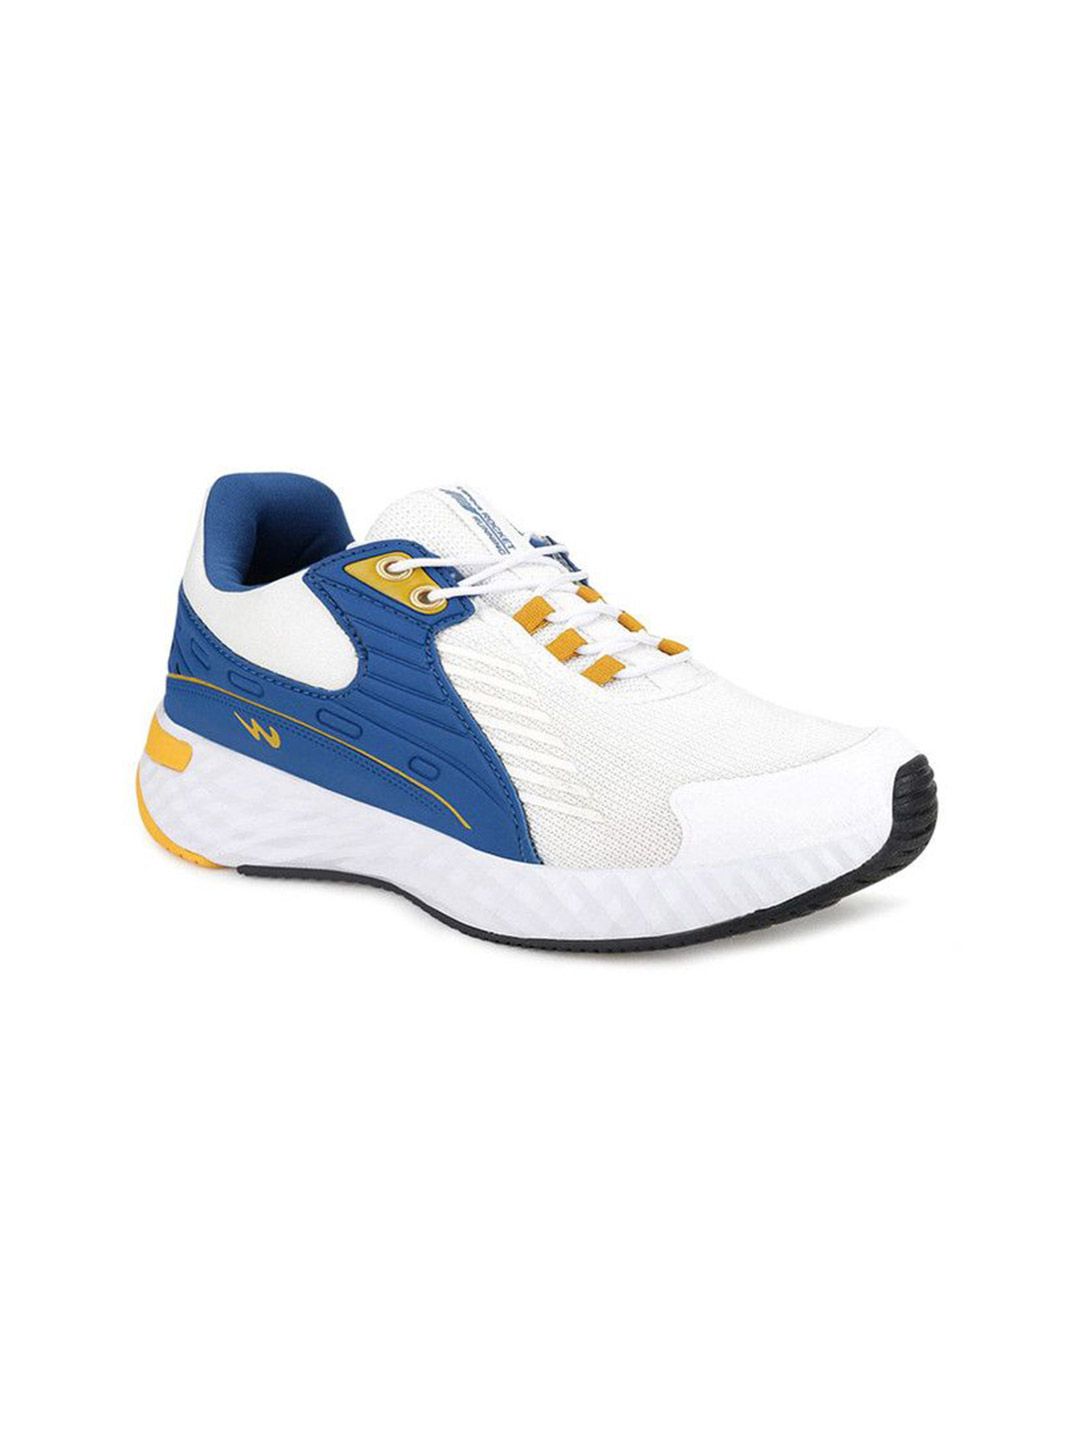 Buy Men Rocket Pro Off White Running Shoes From Fancode Shop.